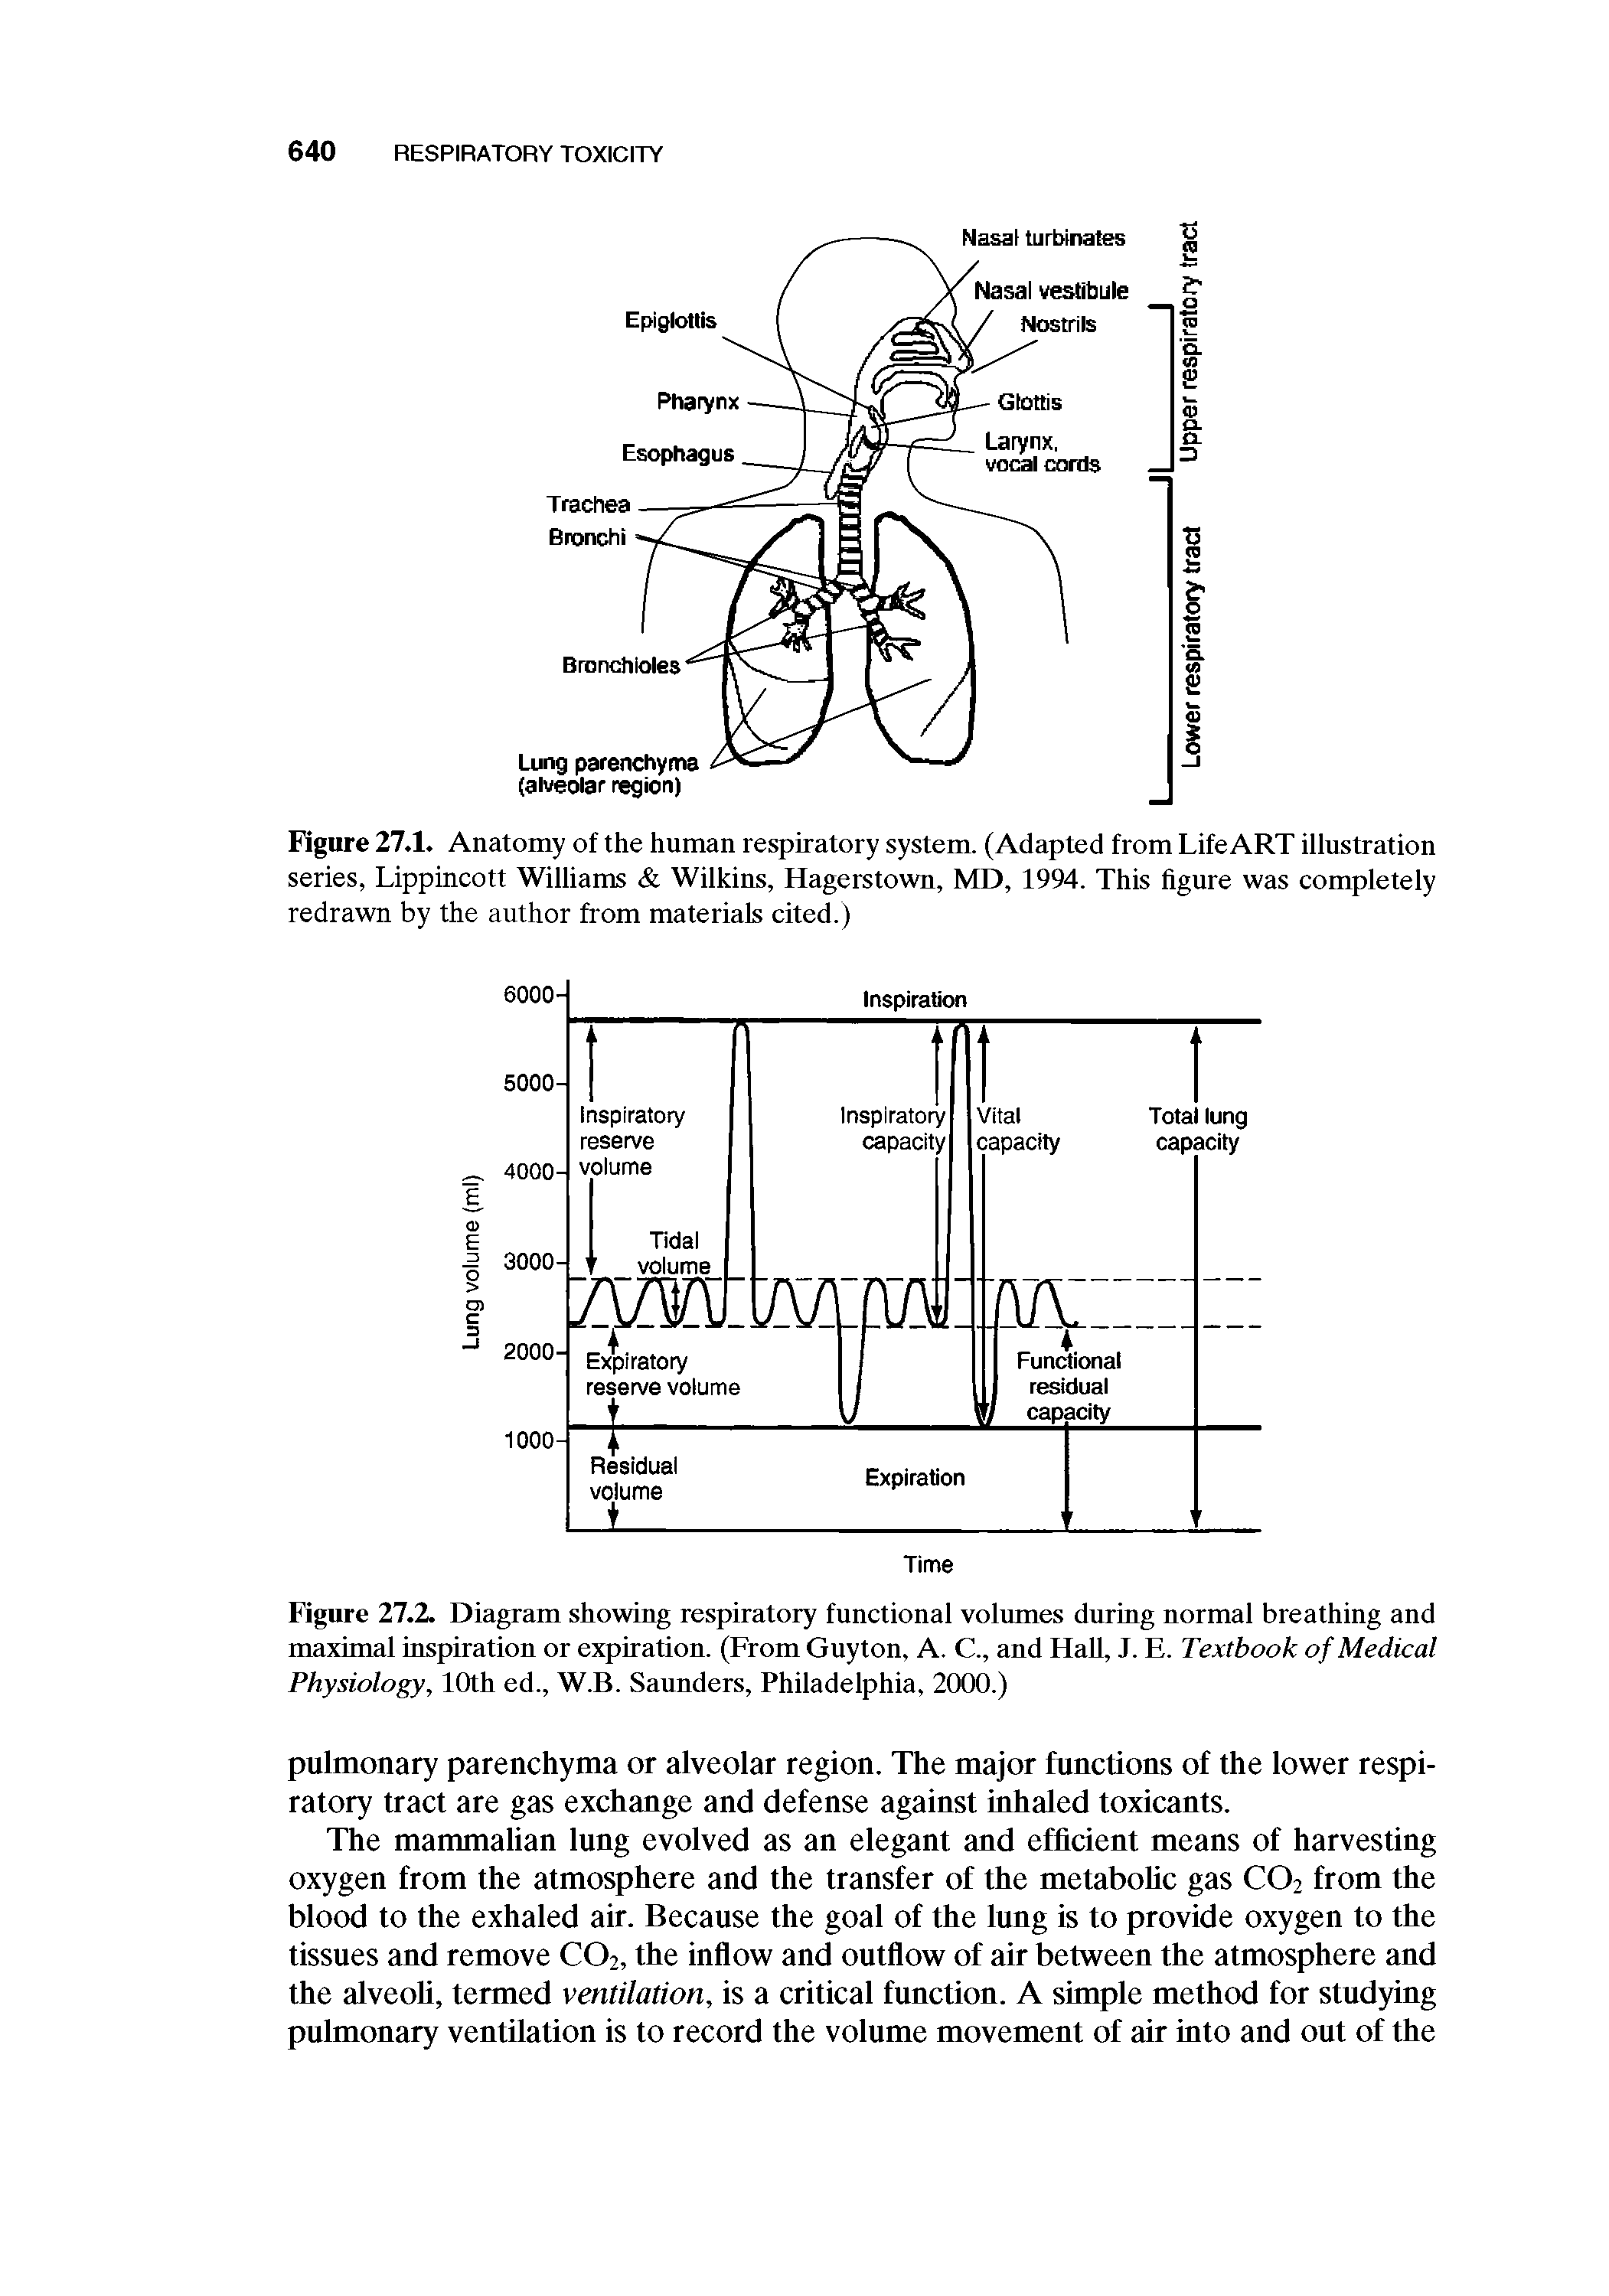 Figure 27.2. Diagram showing respiratory functional volumes during normal breathing and maximal inspiration or expiration. (From Guyton, A. C., and Hall, J. E. Textbook of Medical Physiology, 10th ed., W.B. Saunders, Philadelphia, 2000.)...